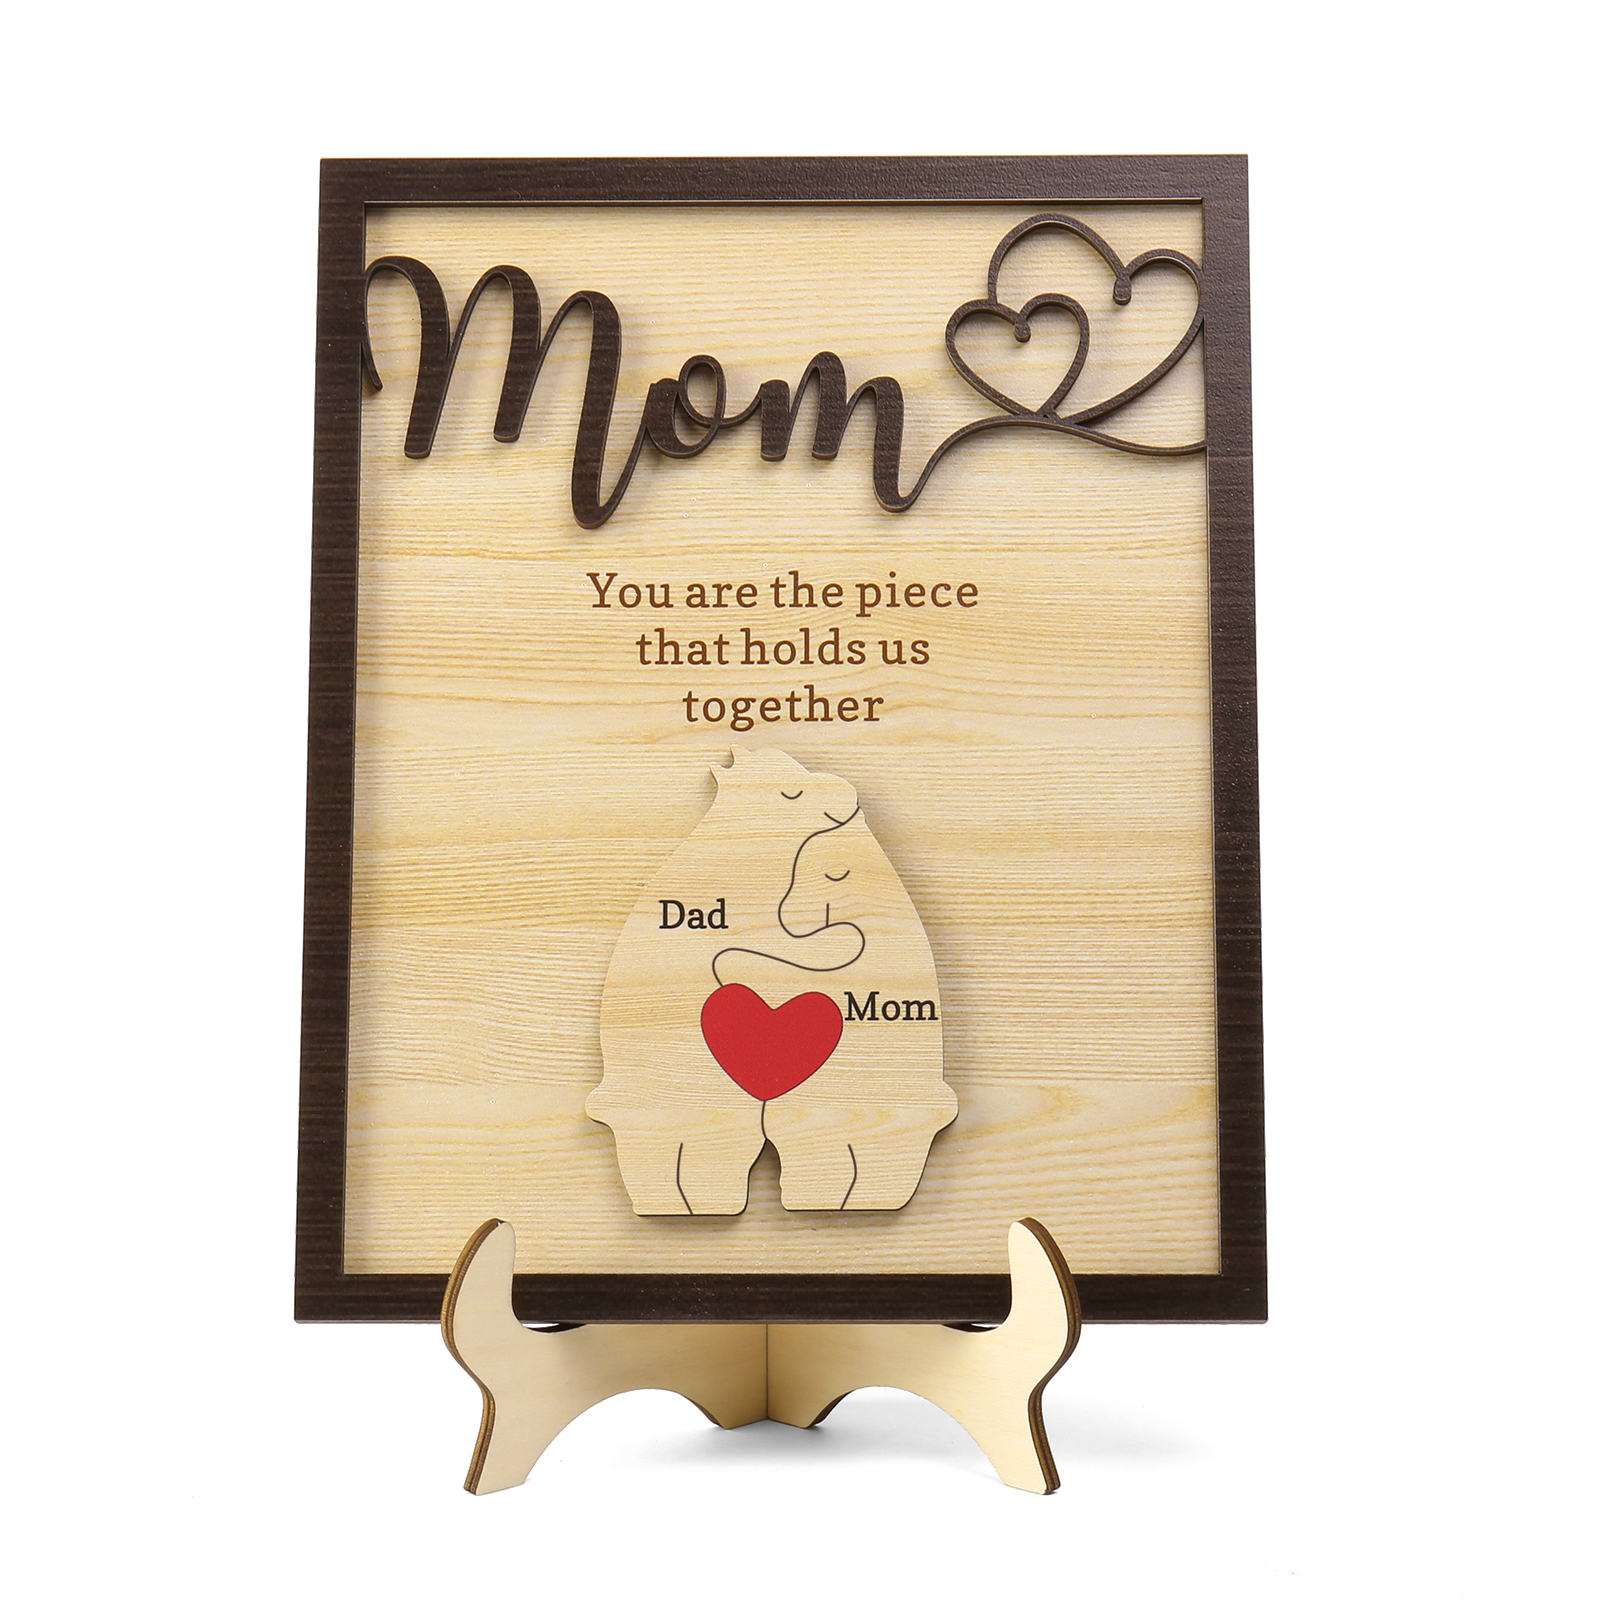 2 Names - Personalized Home Frame Wooden Ornaments Cute Bear Style Ornaments for Mom